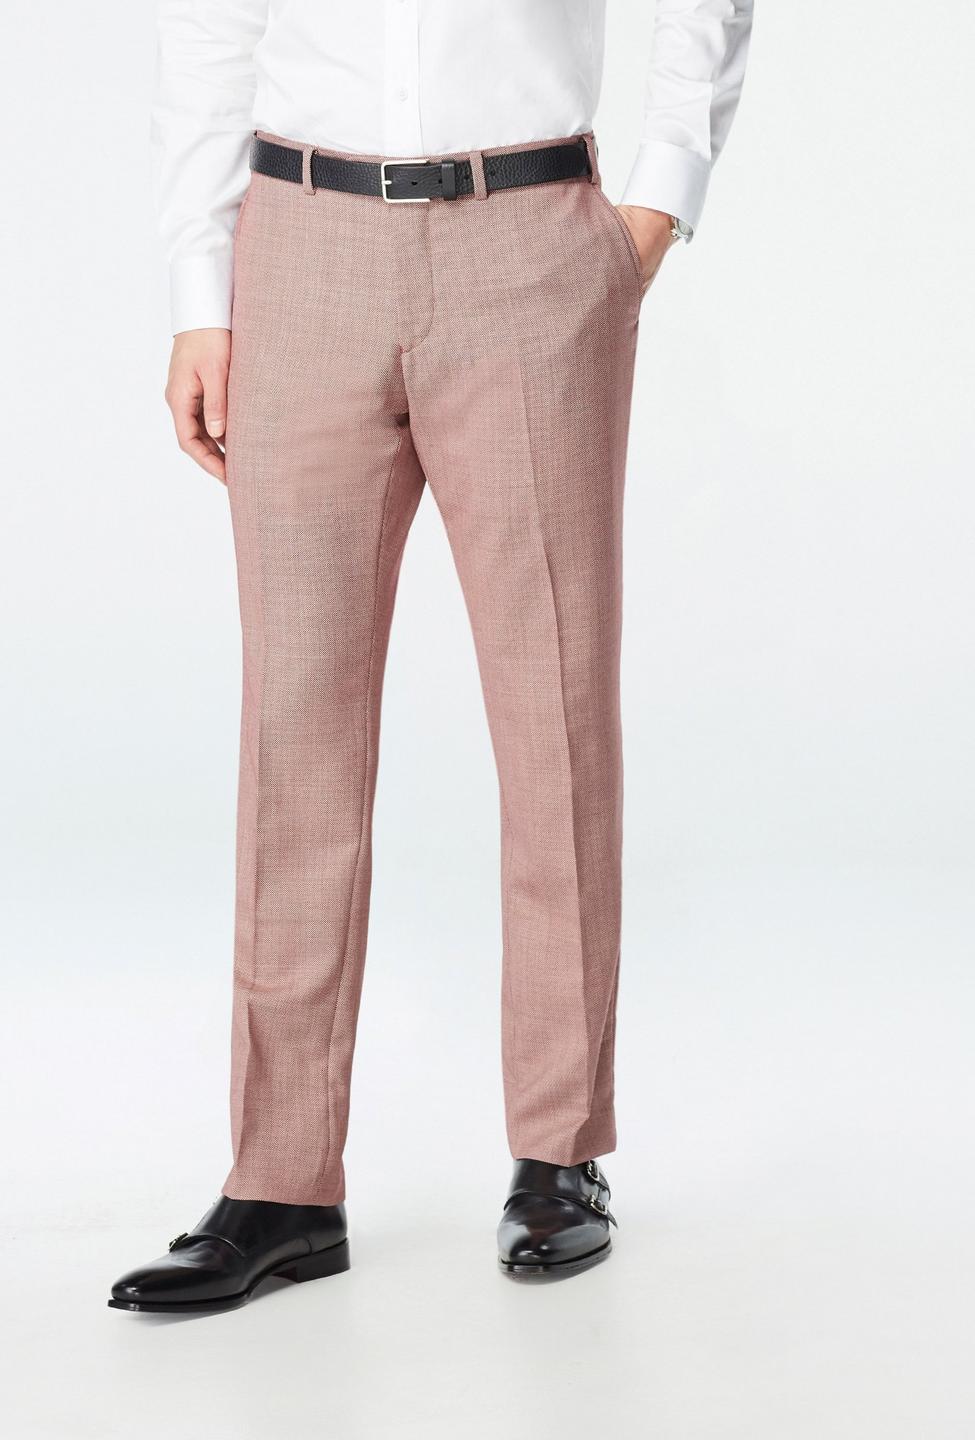 Red pants - Chelsea Solid Design from Seasonal Indochino Collection